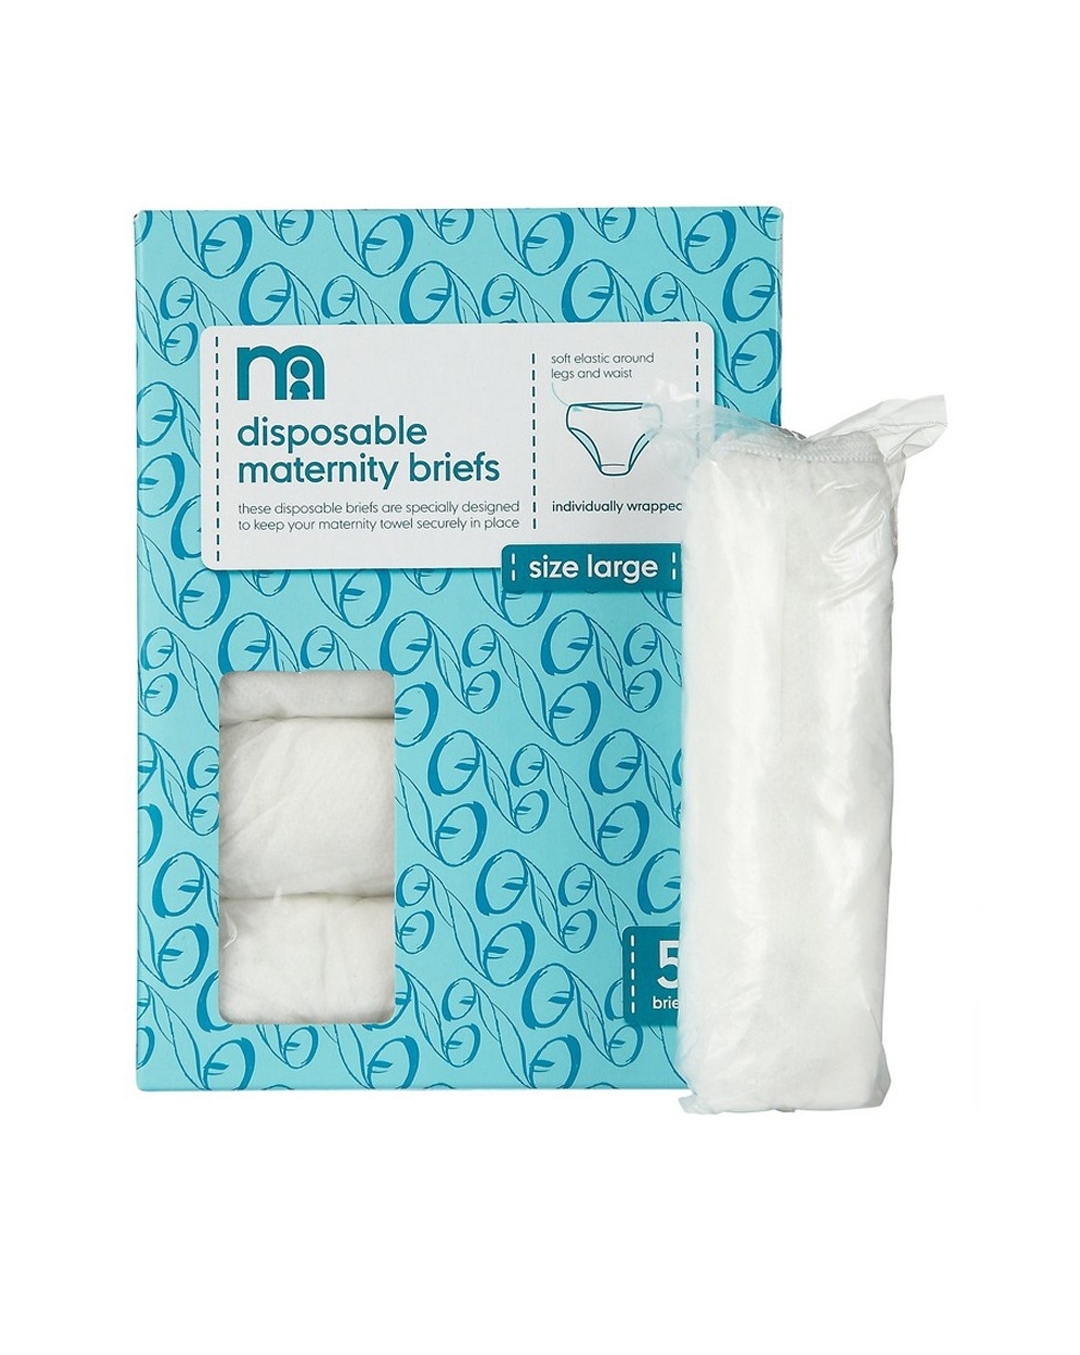 Buy Mothercare Disposable Maternity Briefs Online at Best Price